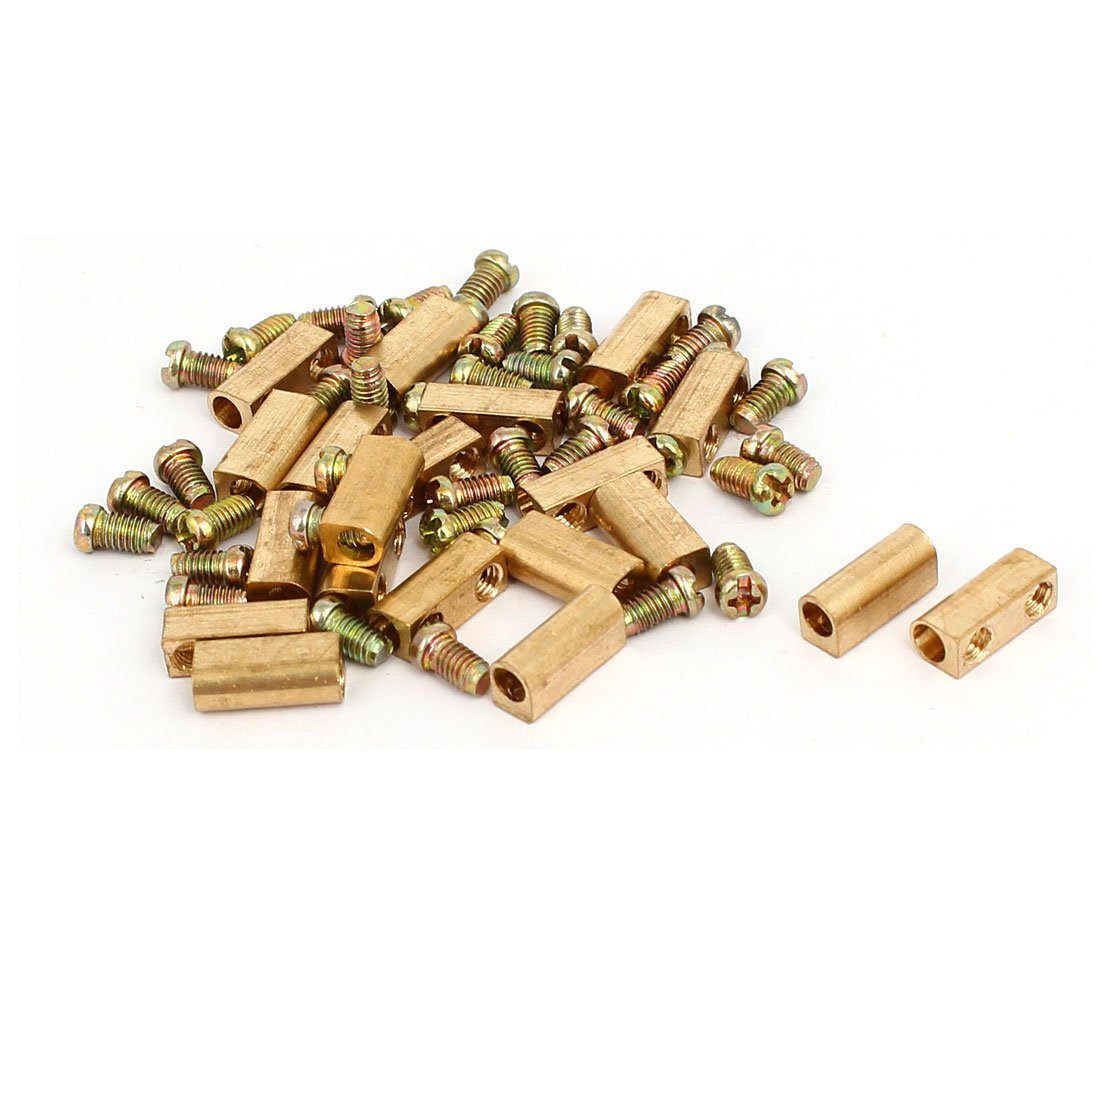 All about the brass terminal blocks